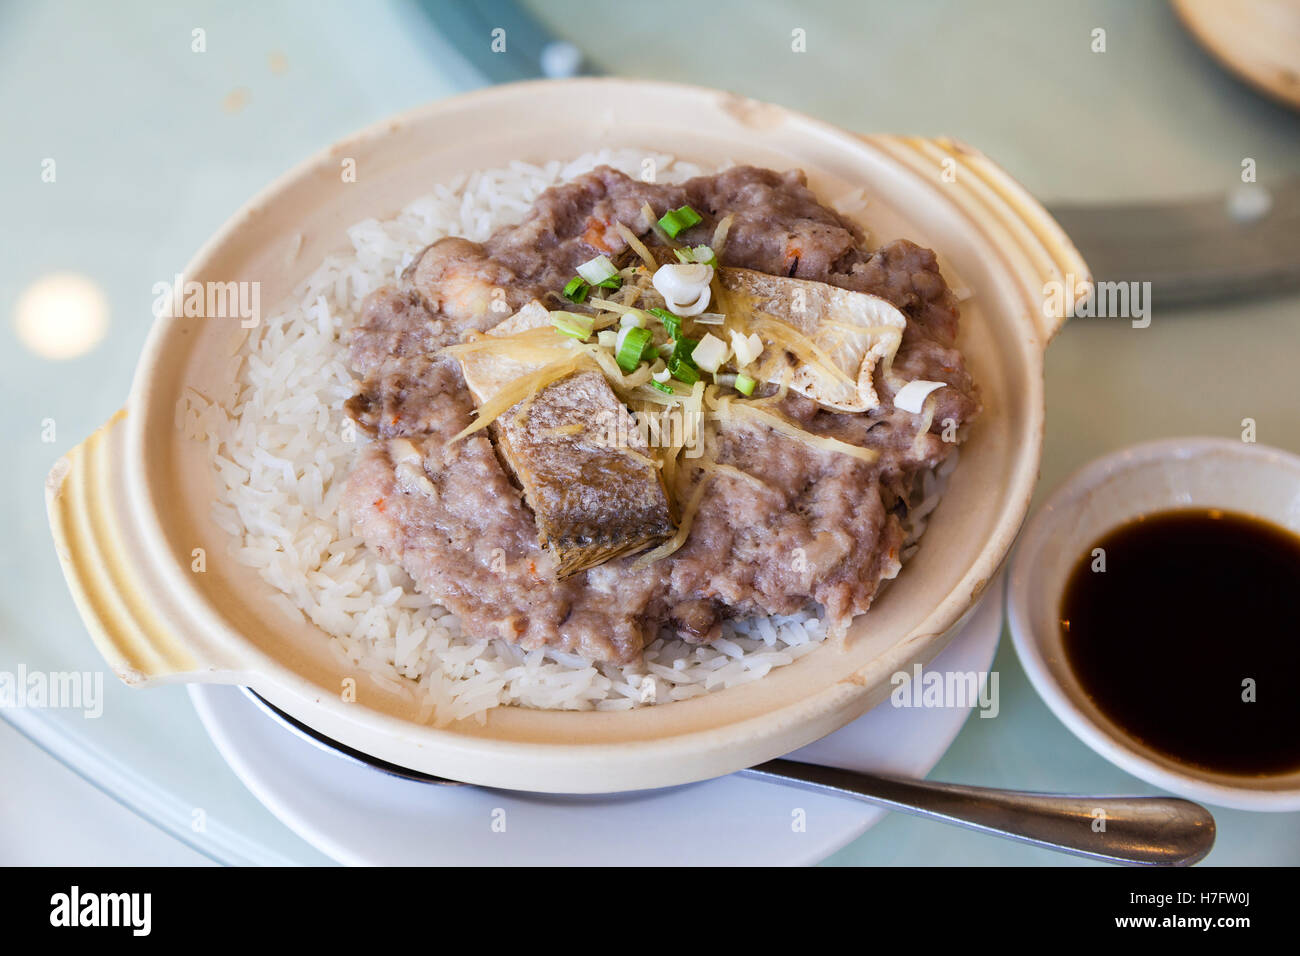 Chinese steamed pork with salted fish rice in claypot is a popular dish in Cantonese dim sum restaurants in Hong Kong. Stock Photo